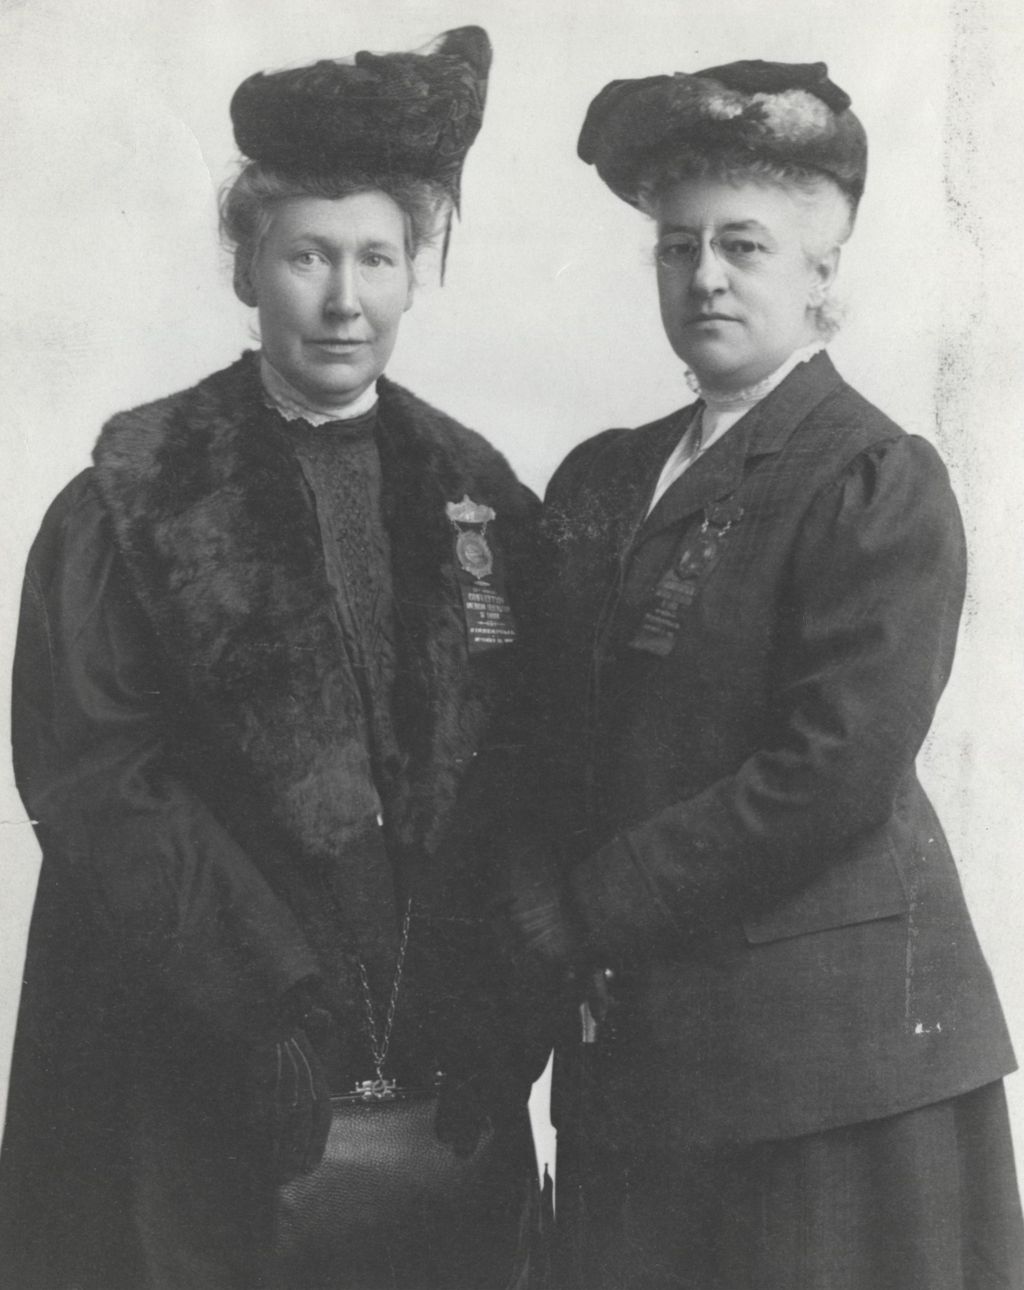 Mary Kenney O'Sullivan and Mary McDowell at the 1906 American Federation of Labor convention